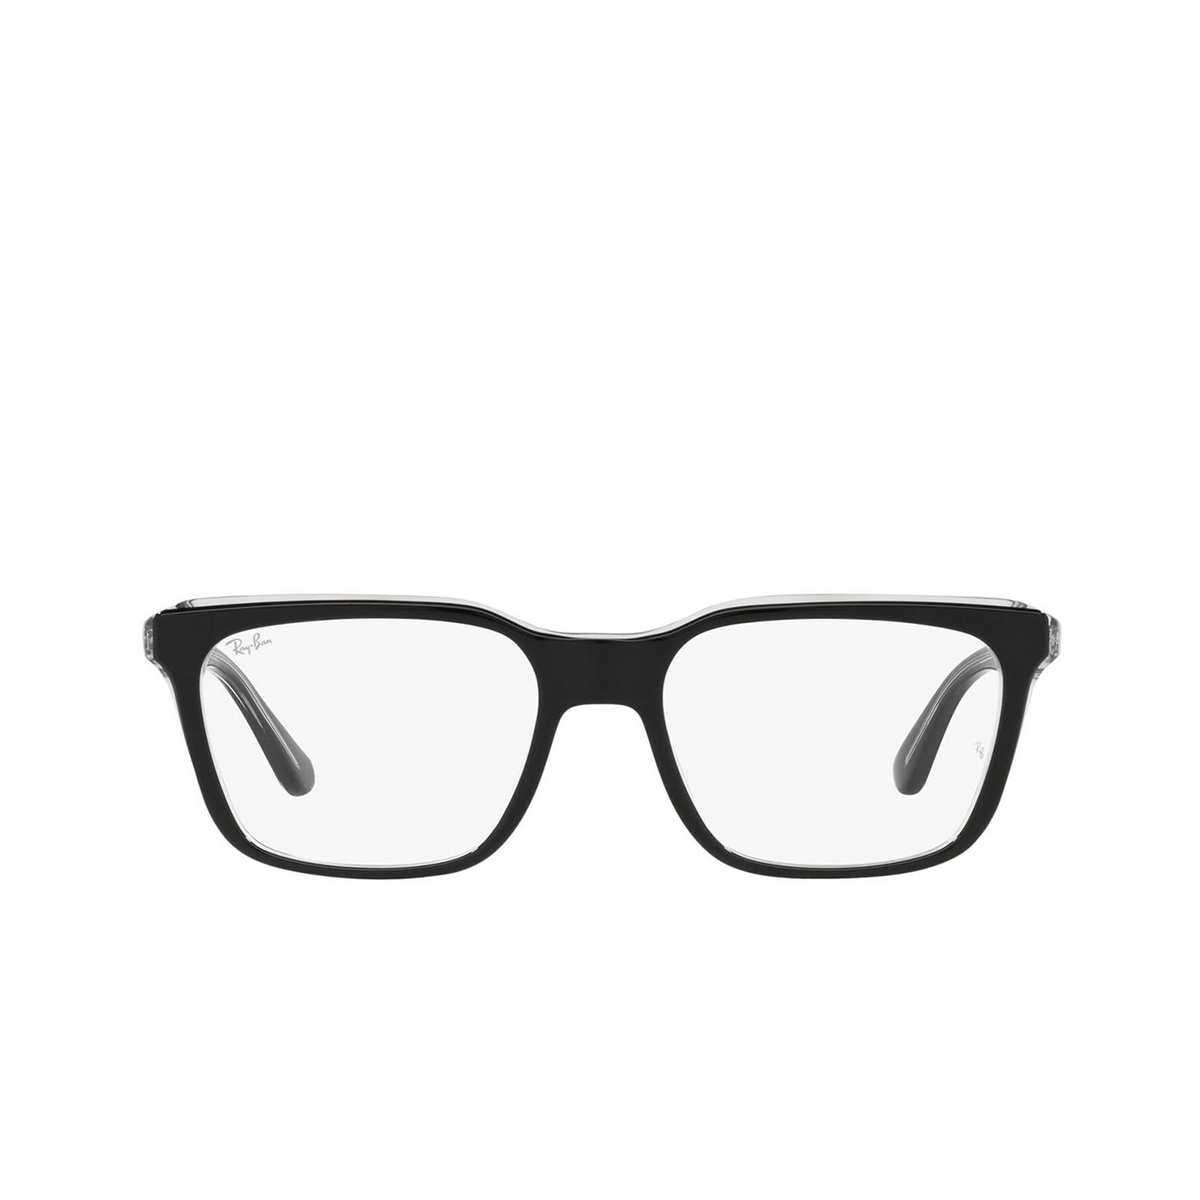 Ray-Ban RX5391 Eyeglasses 2034 Black on Transparent - front view